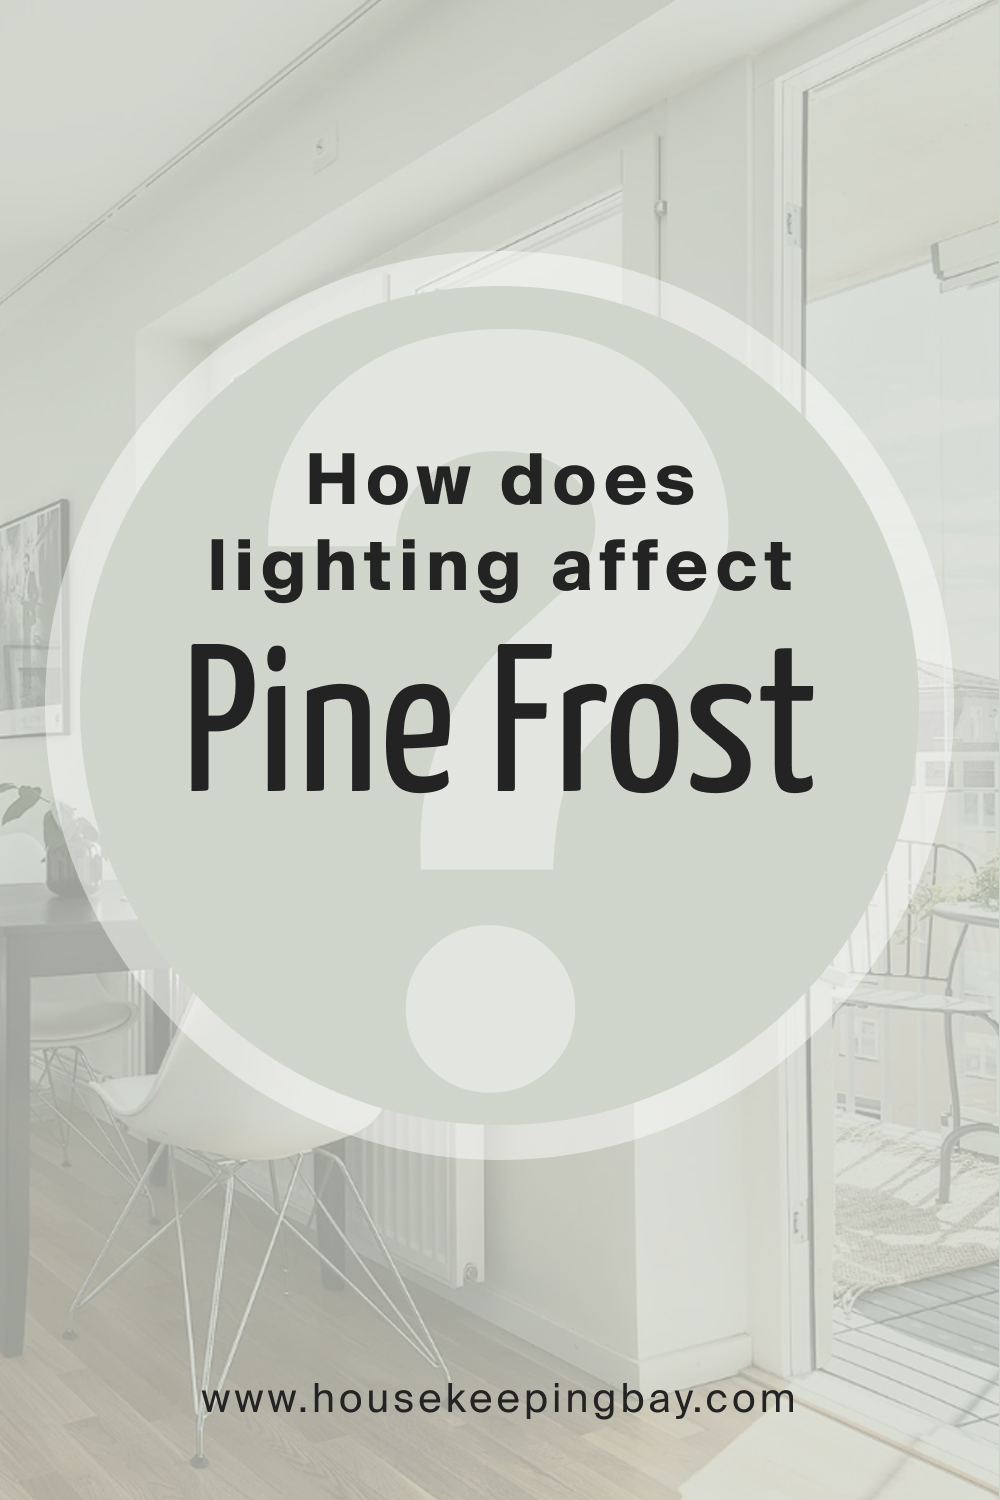 How does lighting affect SW 9656 Pine Frost